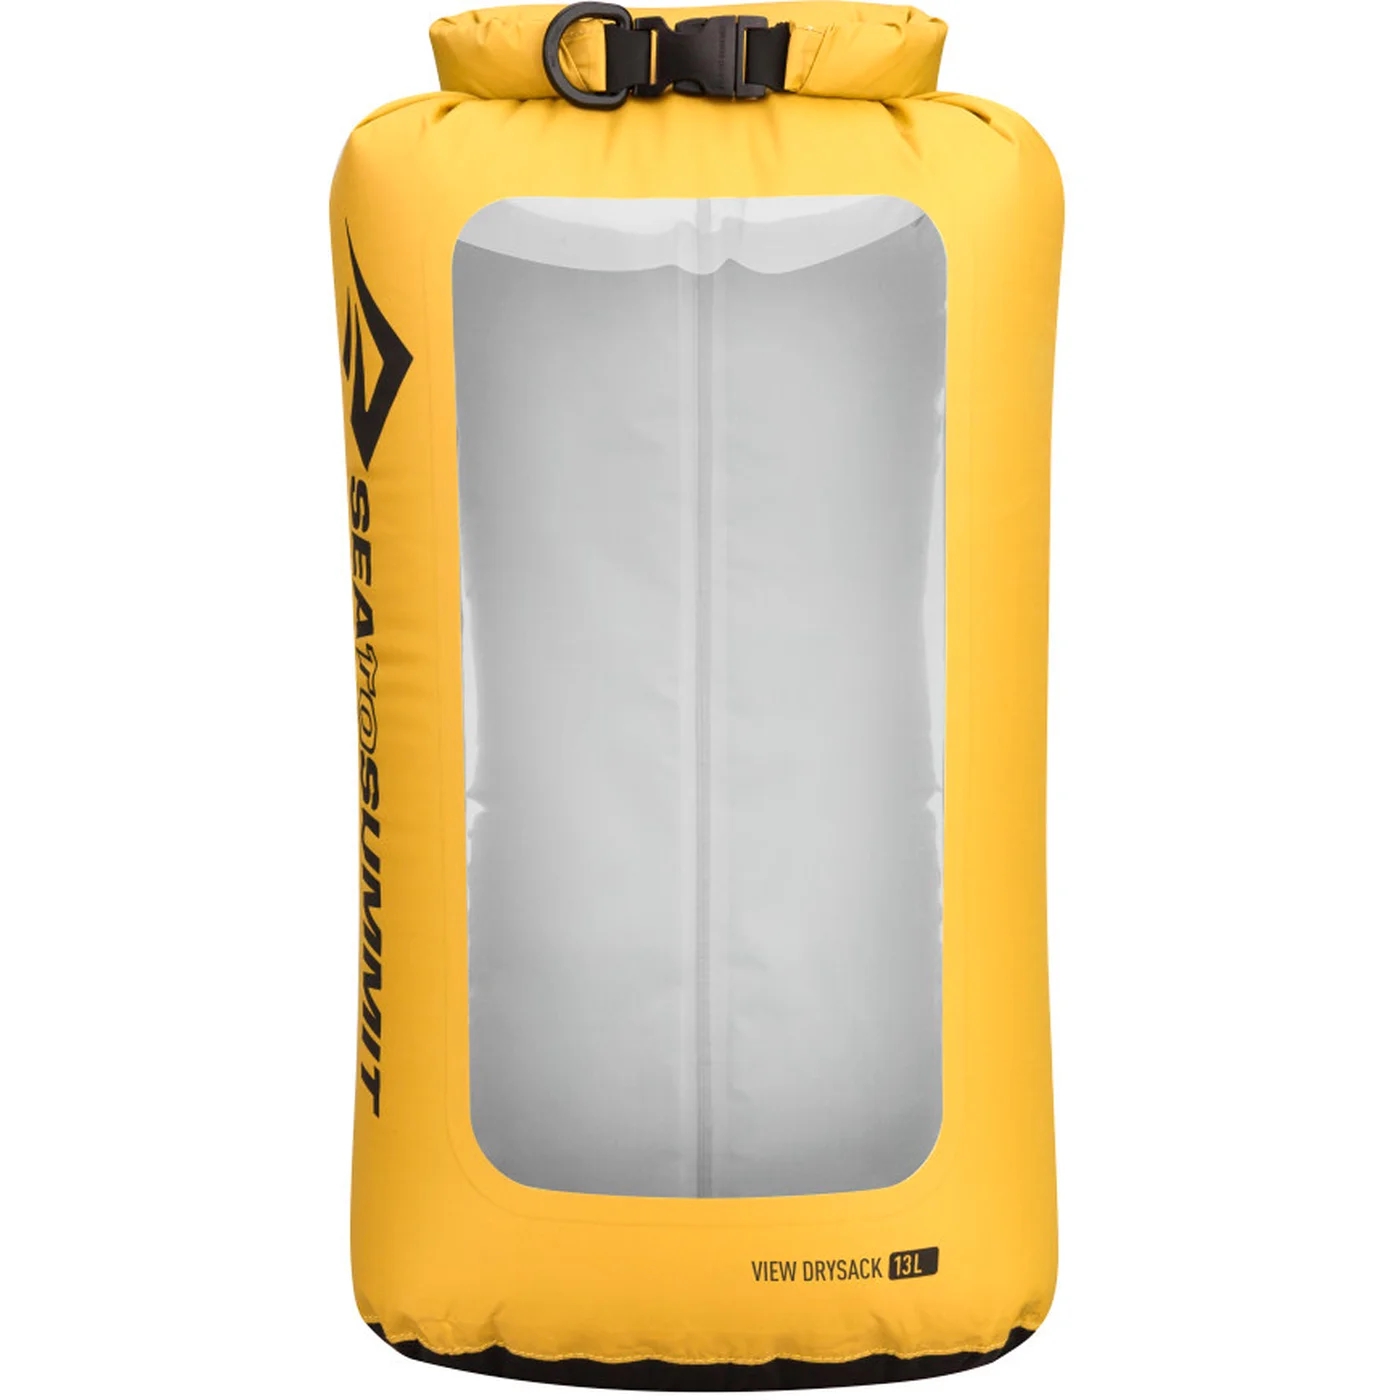 SEA TO SUMMIT TASCHE VIEW DRY SACK - 13 LITER YELLOW YELLOW 6Qptw9Fe